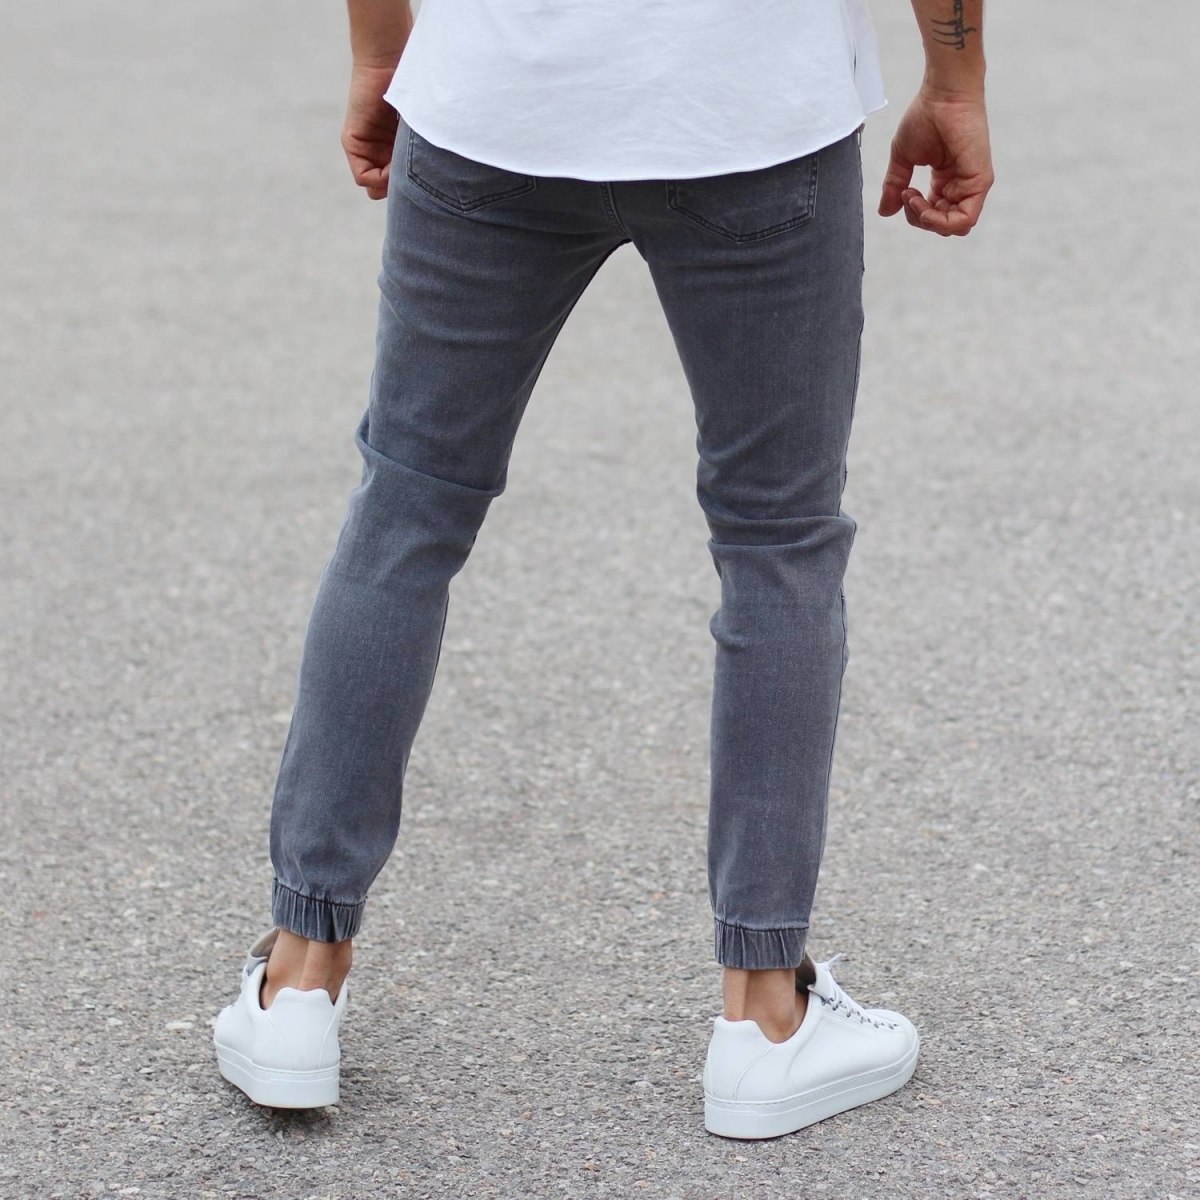 Grey Jeans With Zipper-Pockets and Tapered Ankles - 3